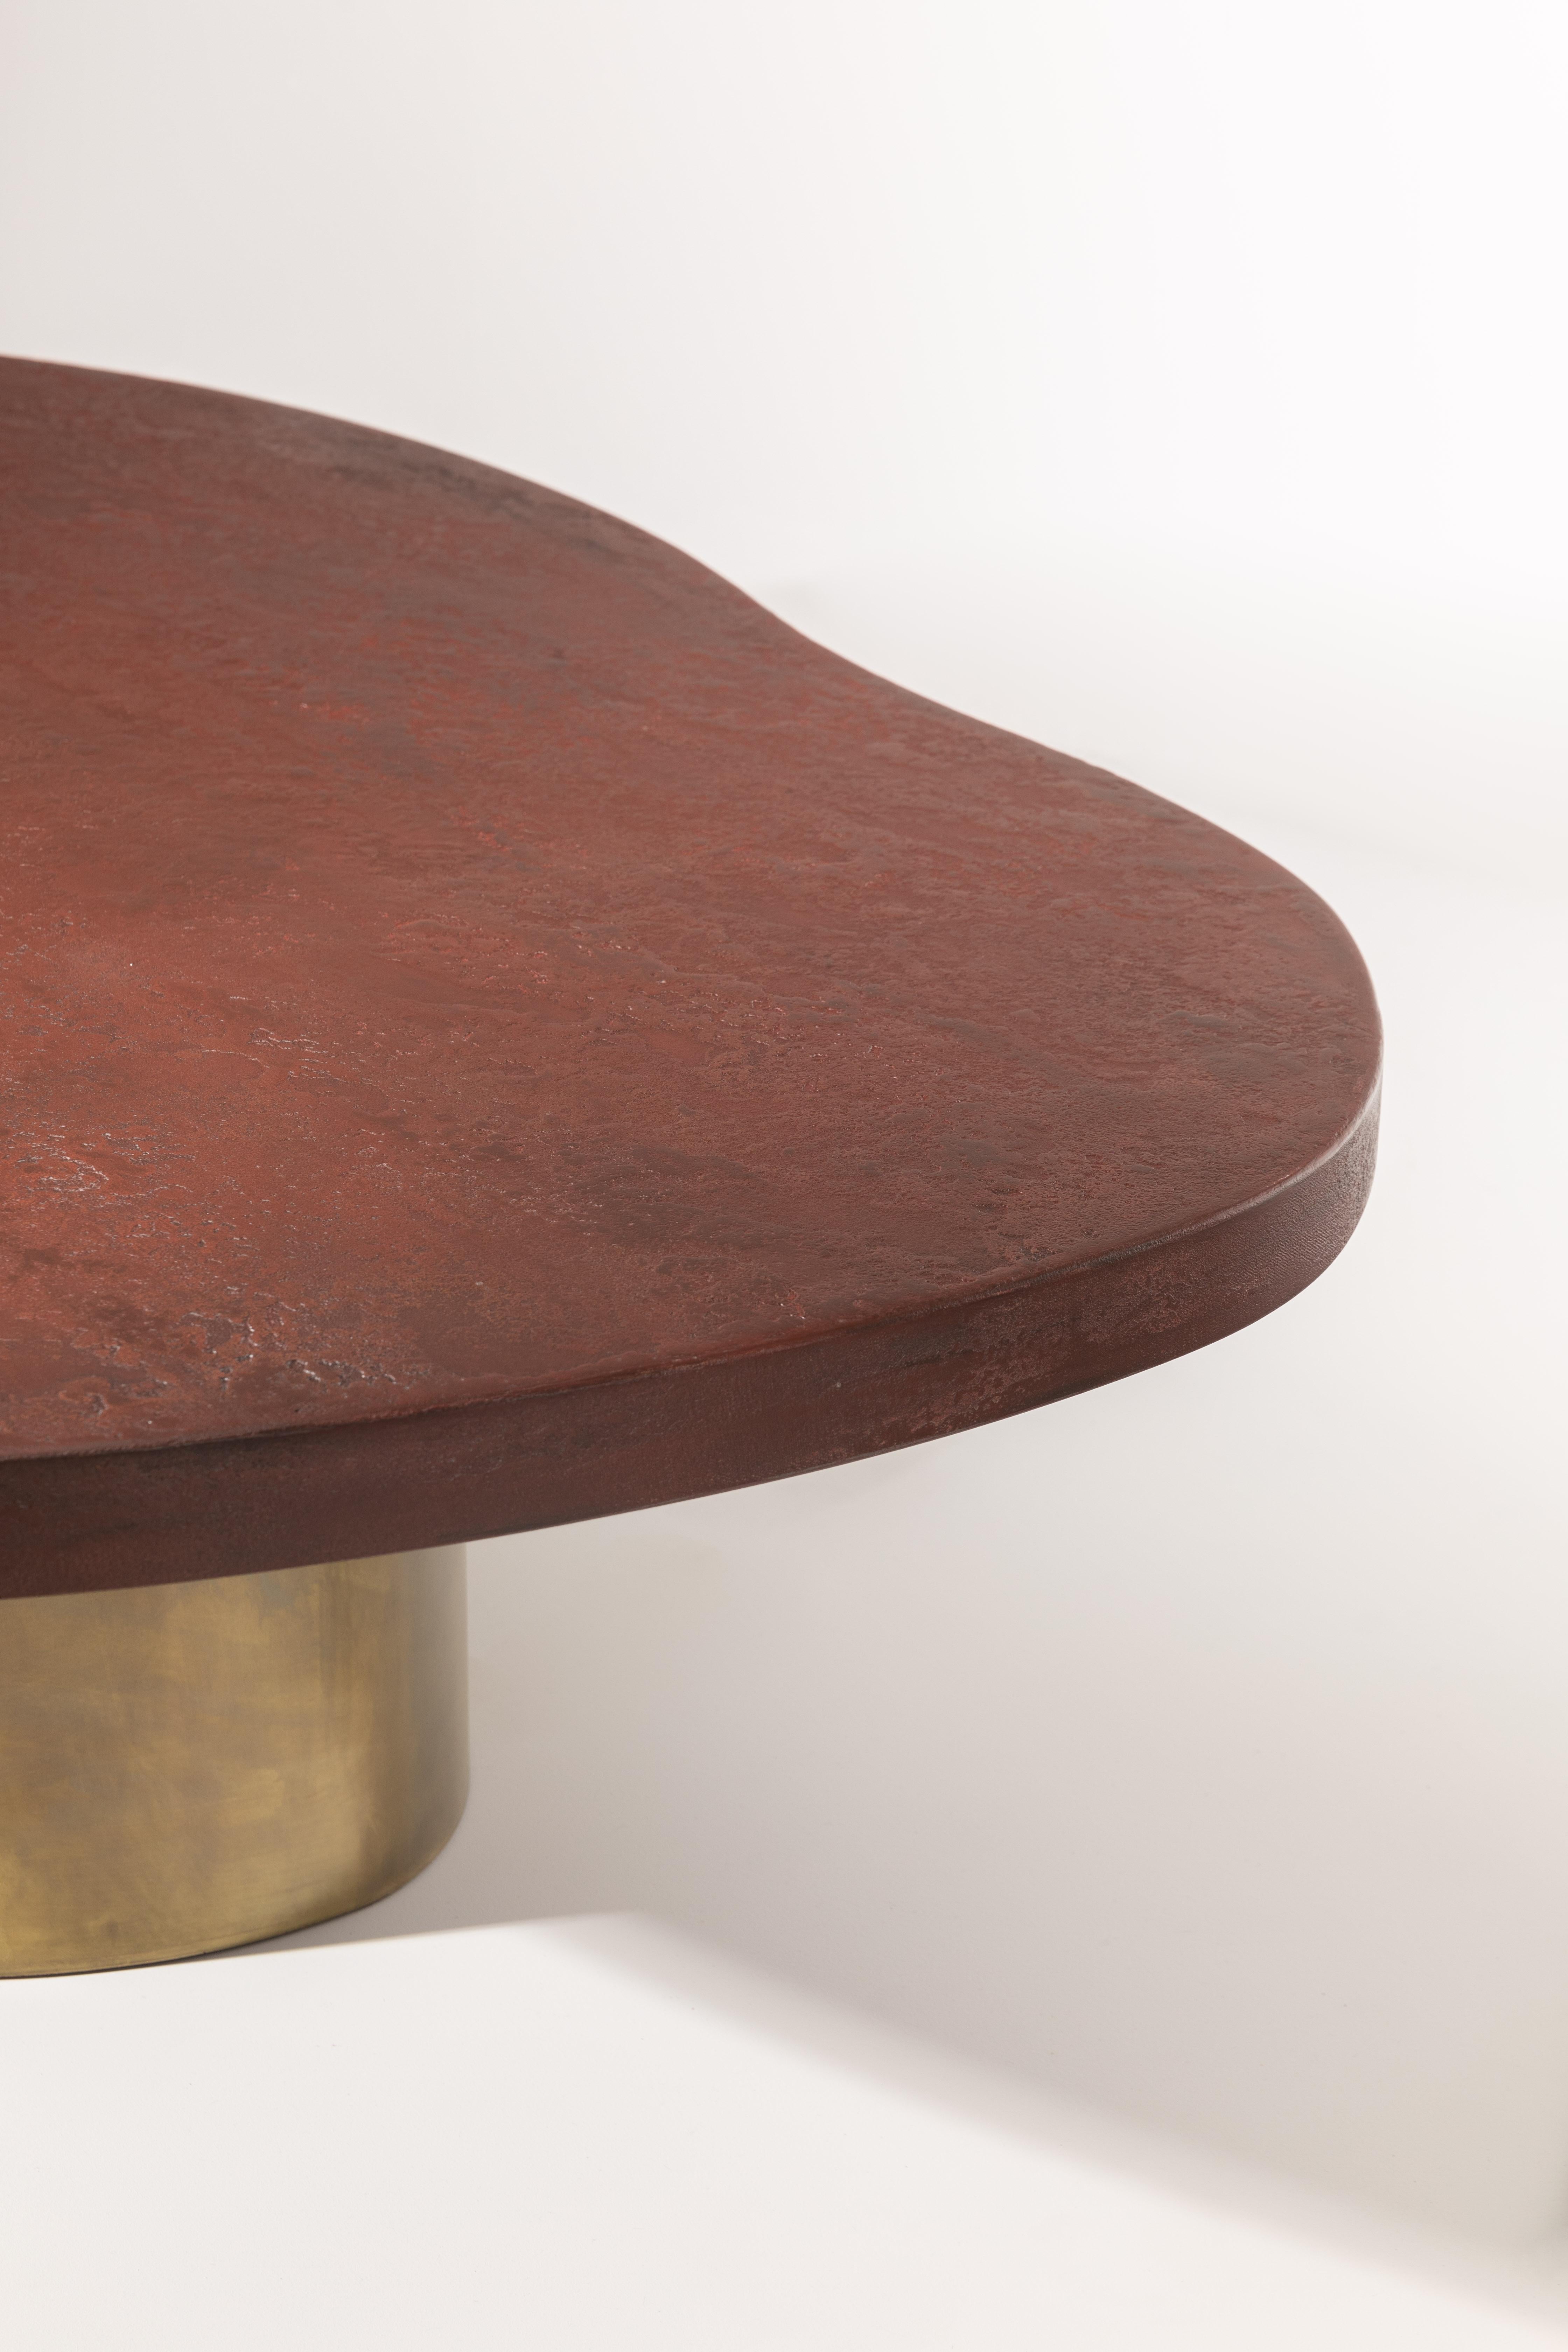 Pierre Bonnefille Table Basse Stone Cuprite Matte - mixed media coffee table In New Condition For Sale In London, GB